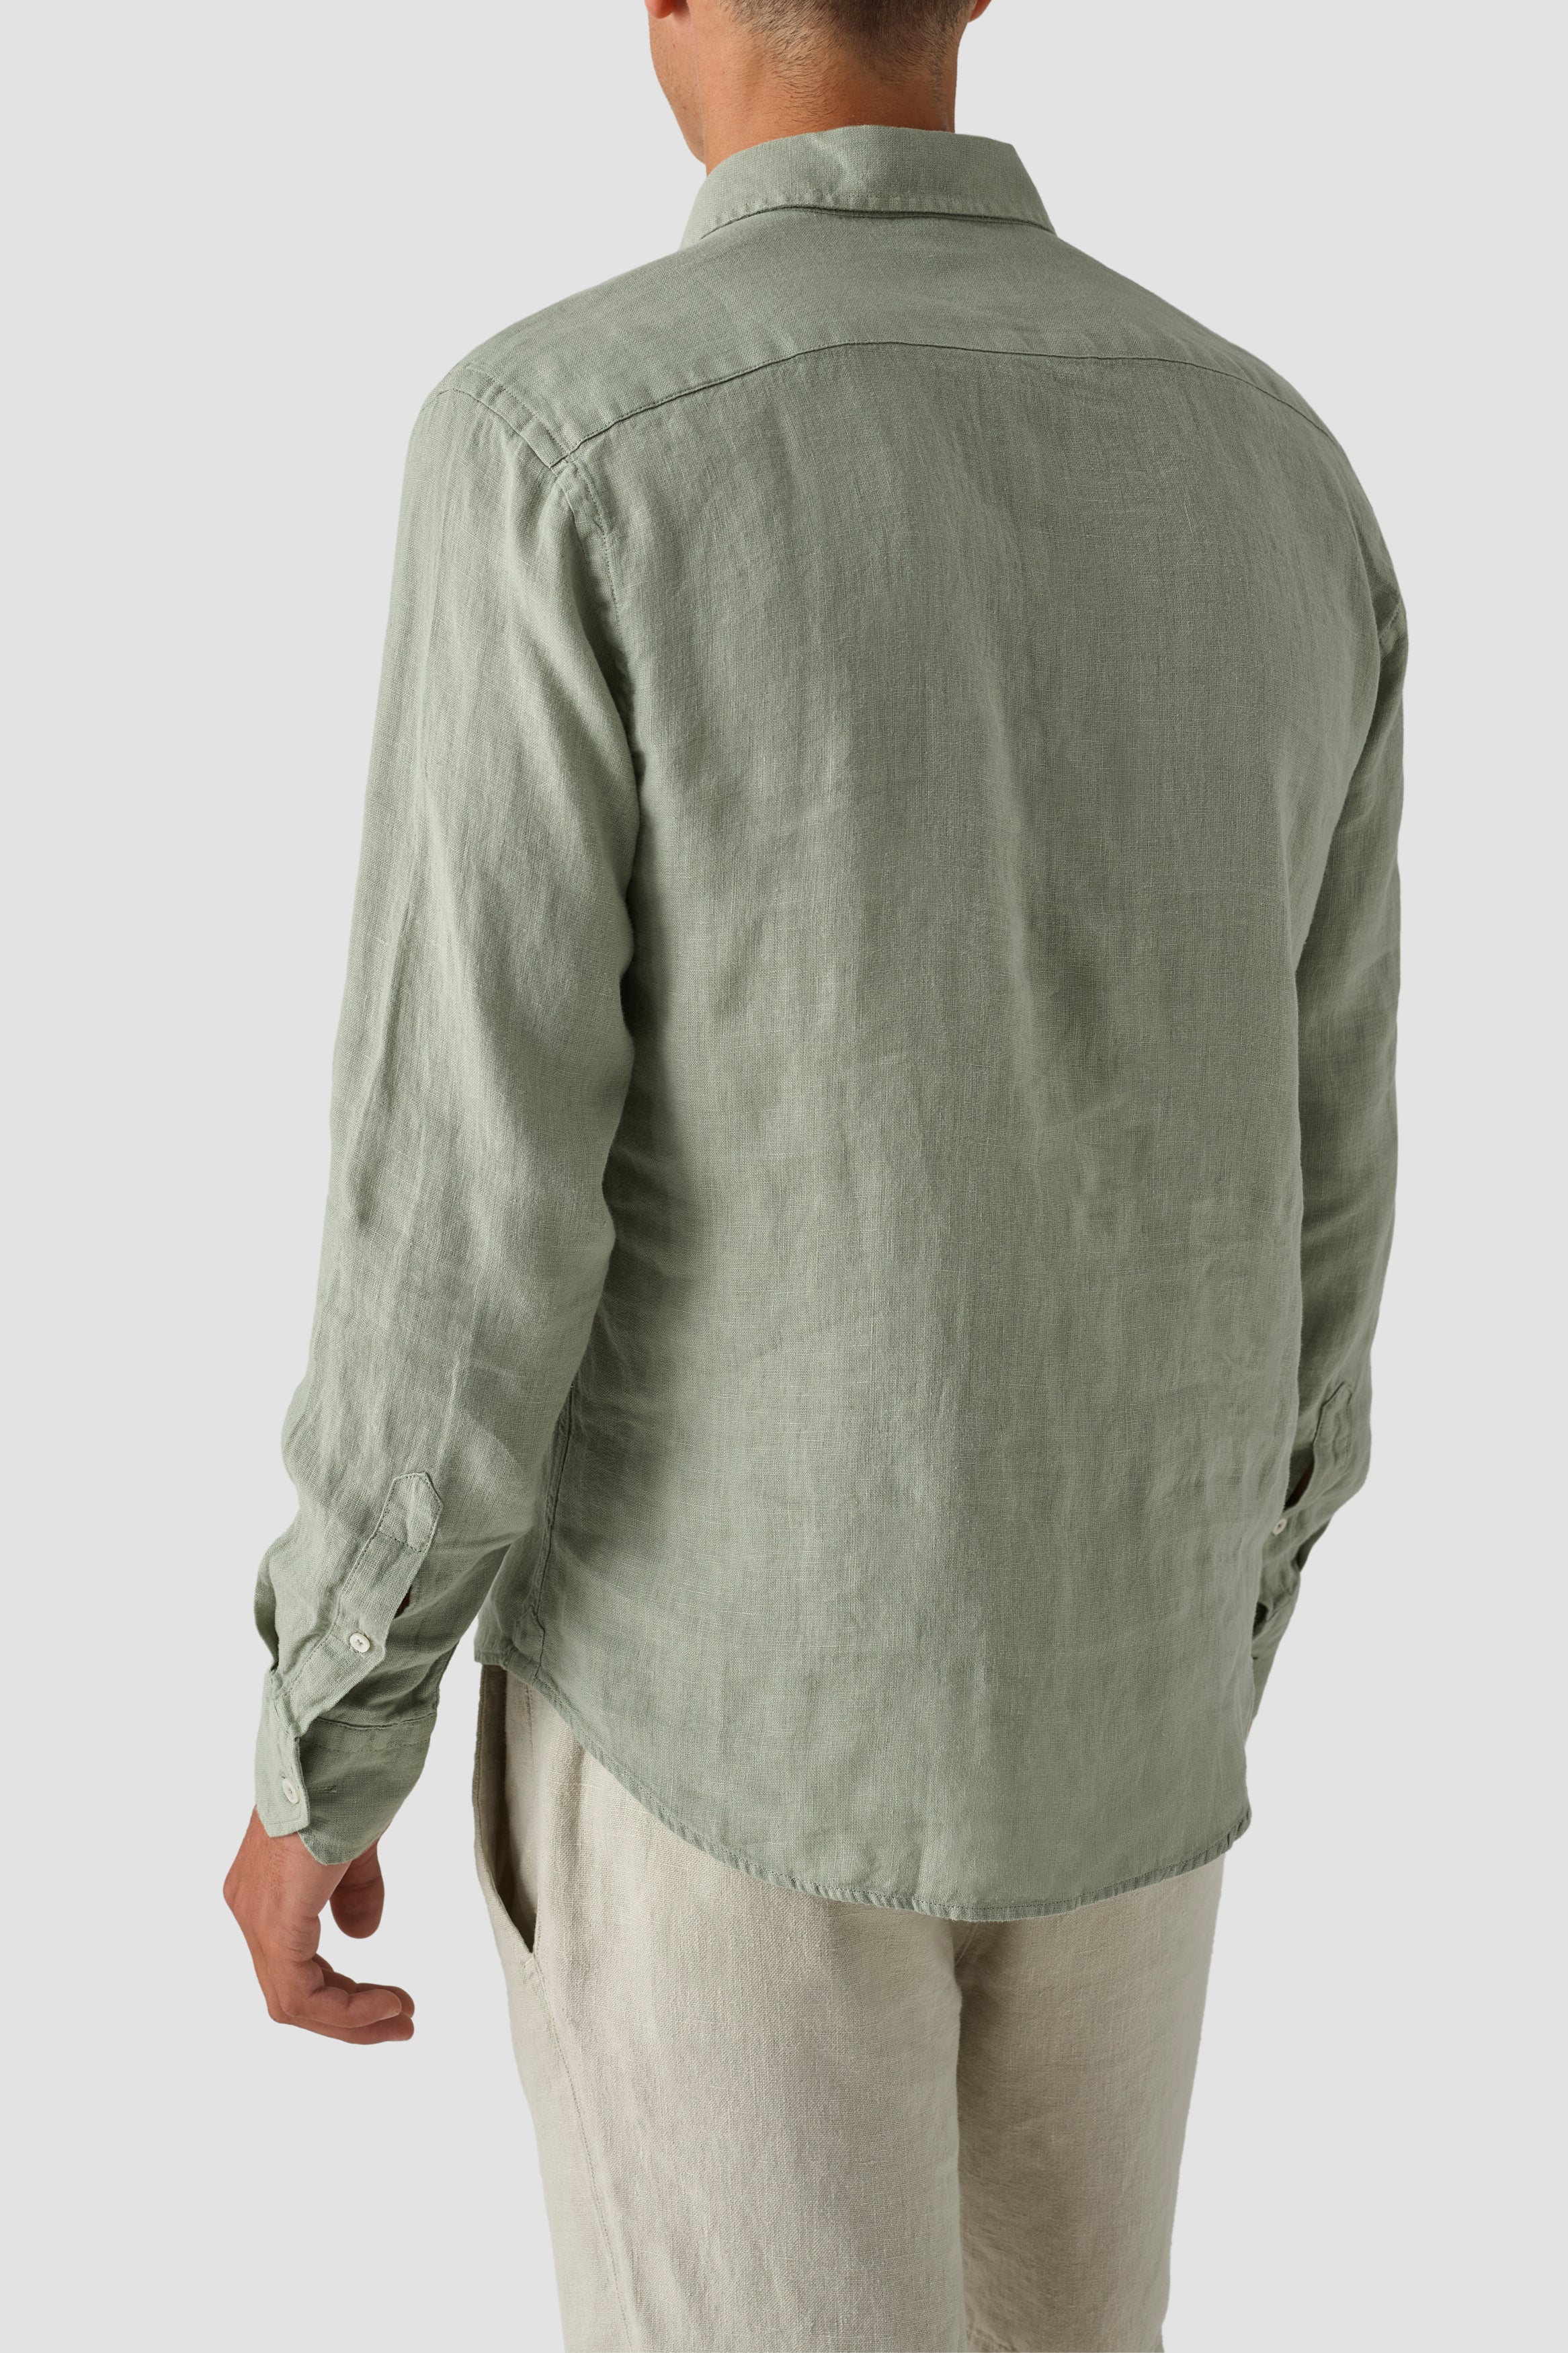 Mr Polo LSleeve Seagrass